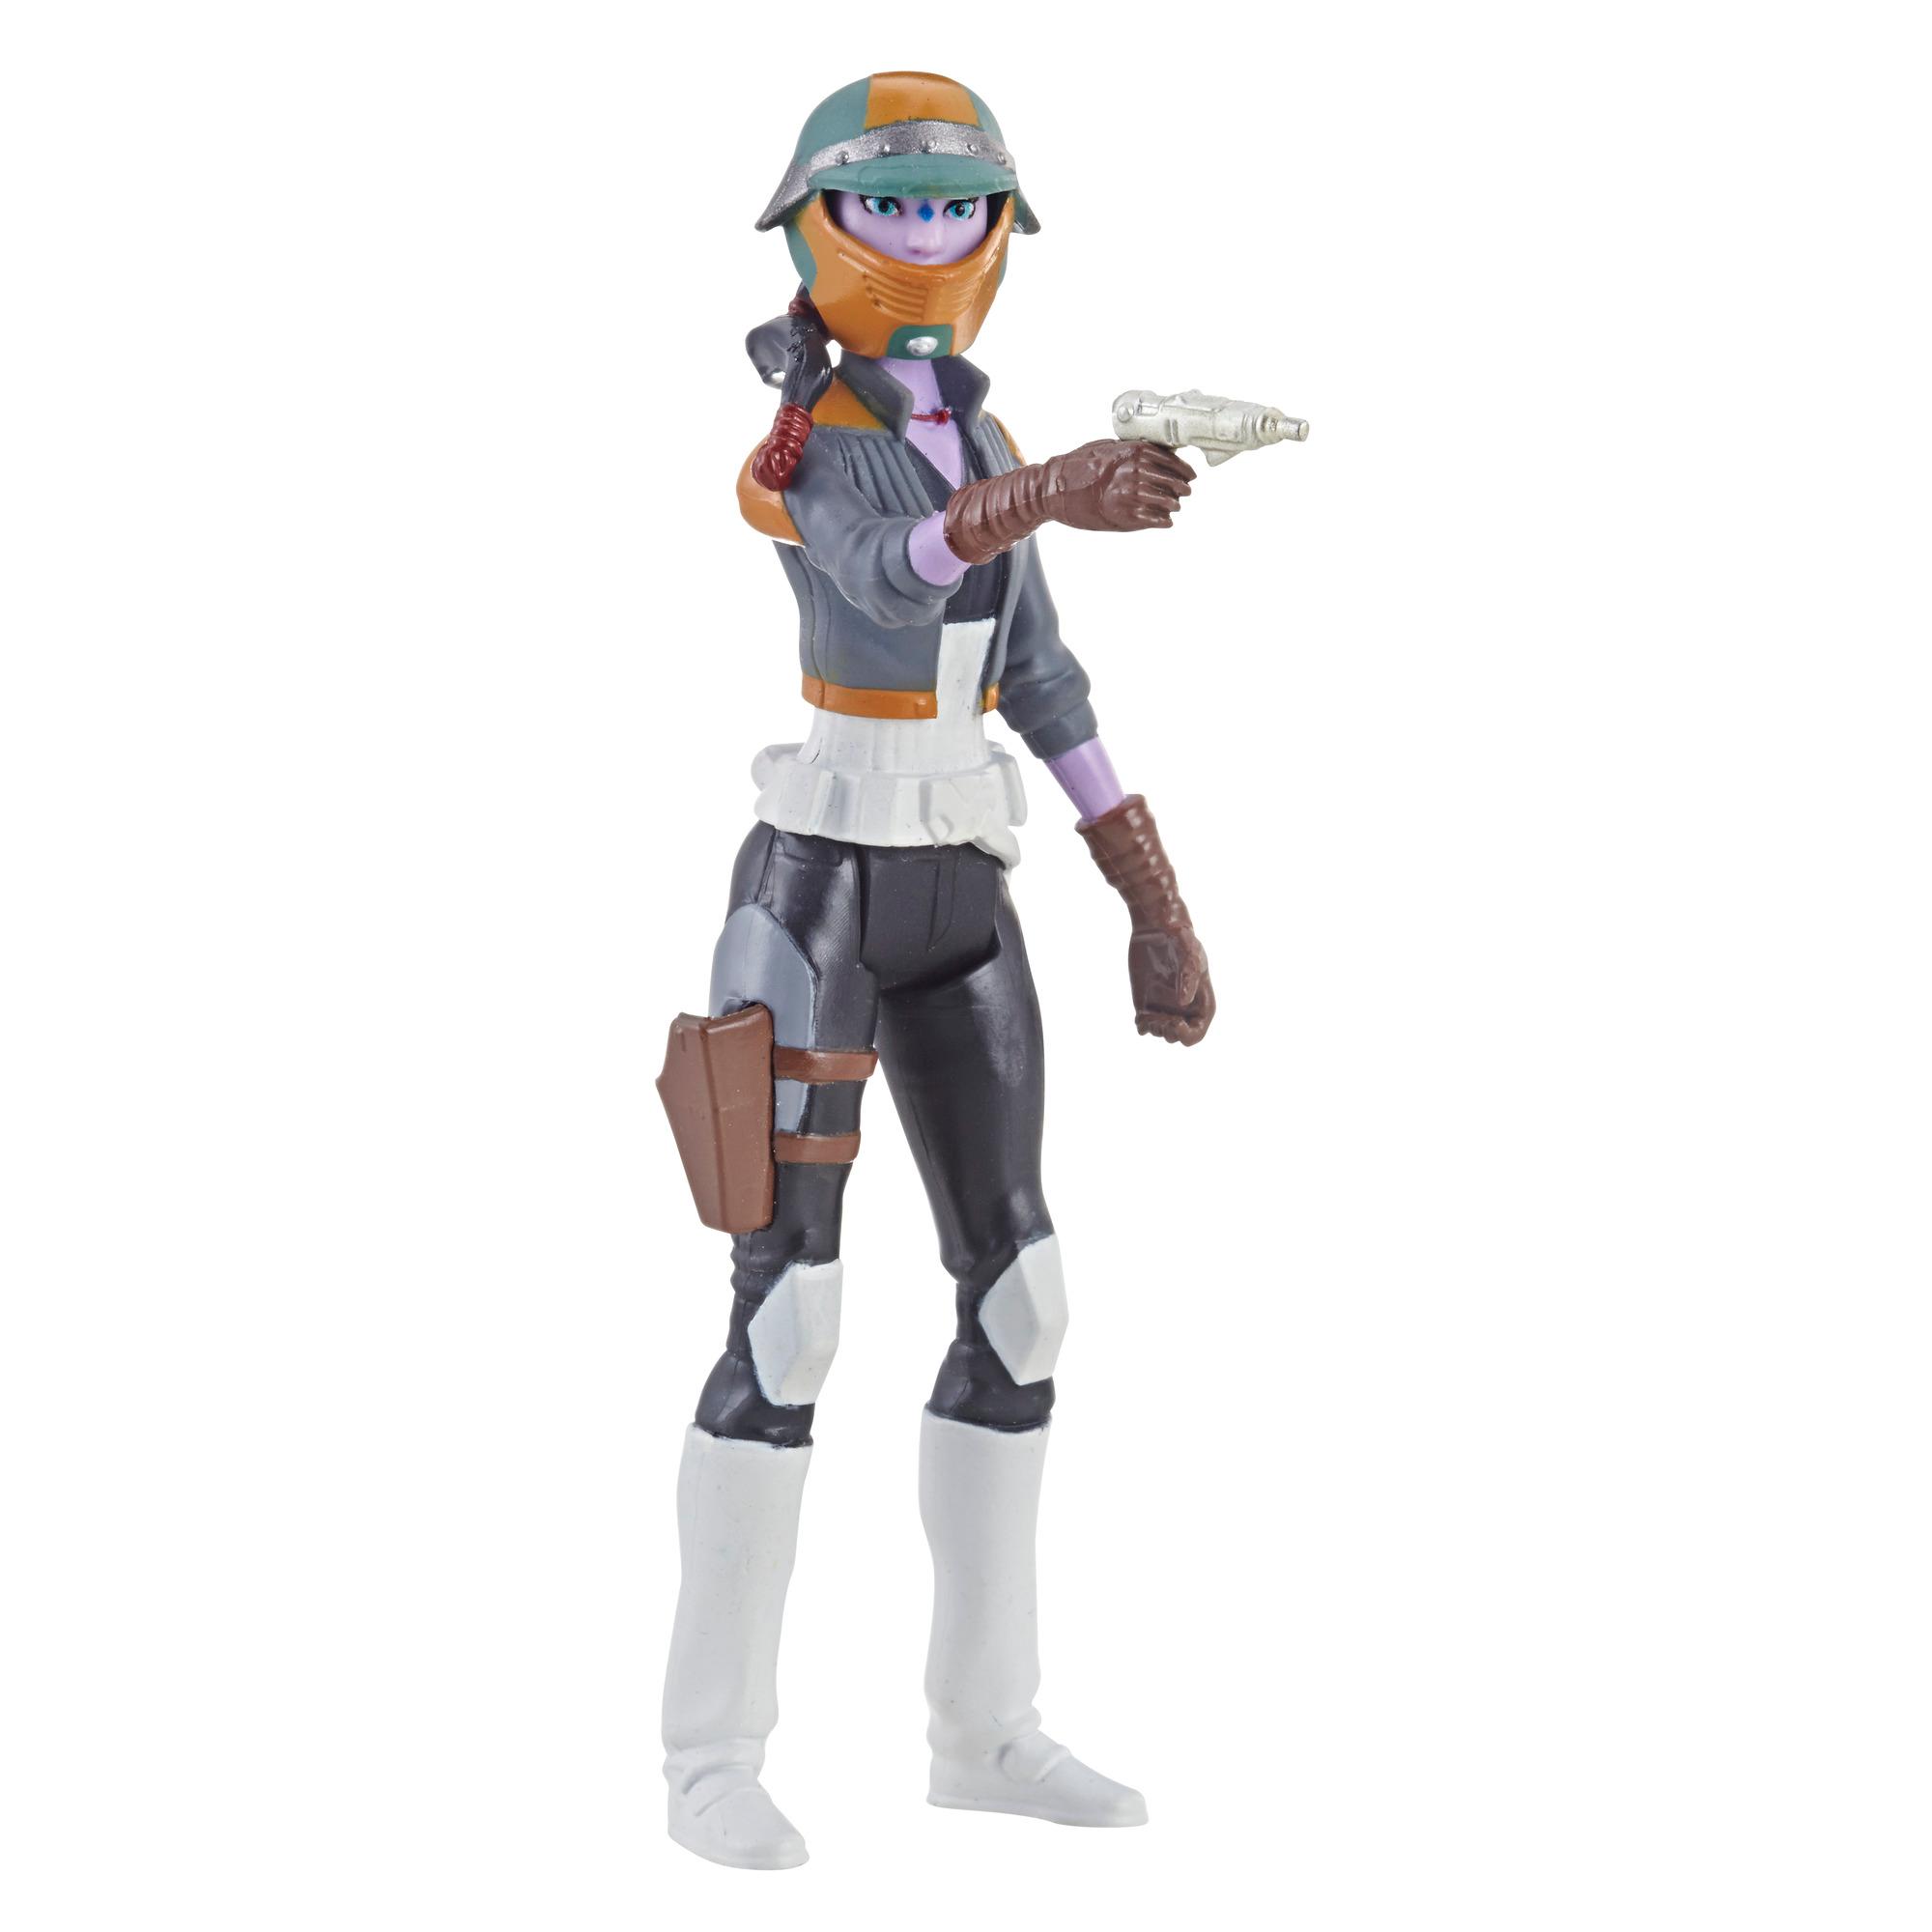 Hasbro Star Wars Resistance Animated Series 3.75-inch Synara San Action Figure for sale online